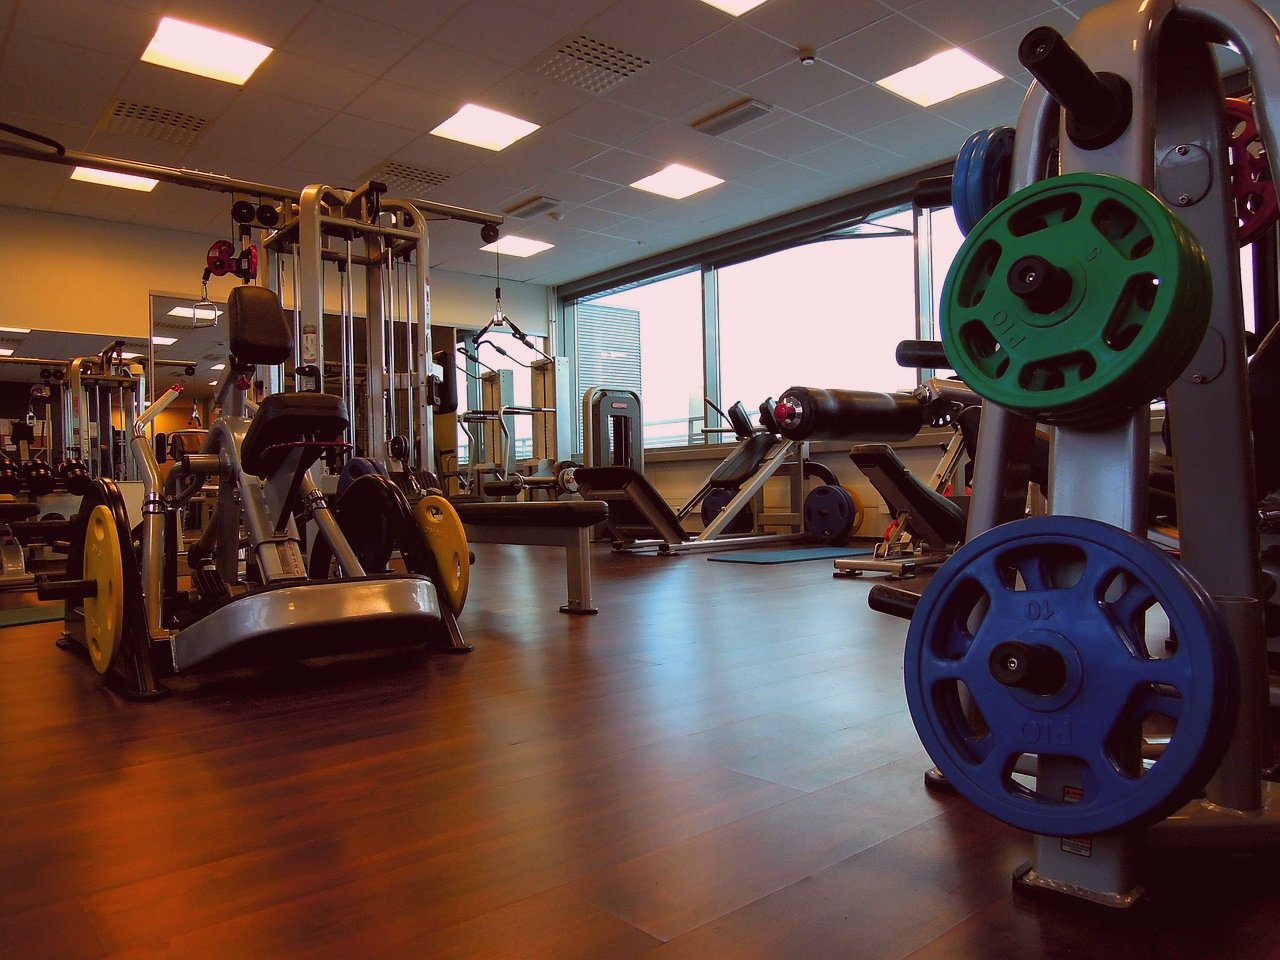 Gym In UAE from PixaBay, user aileino 